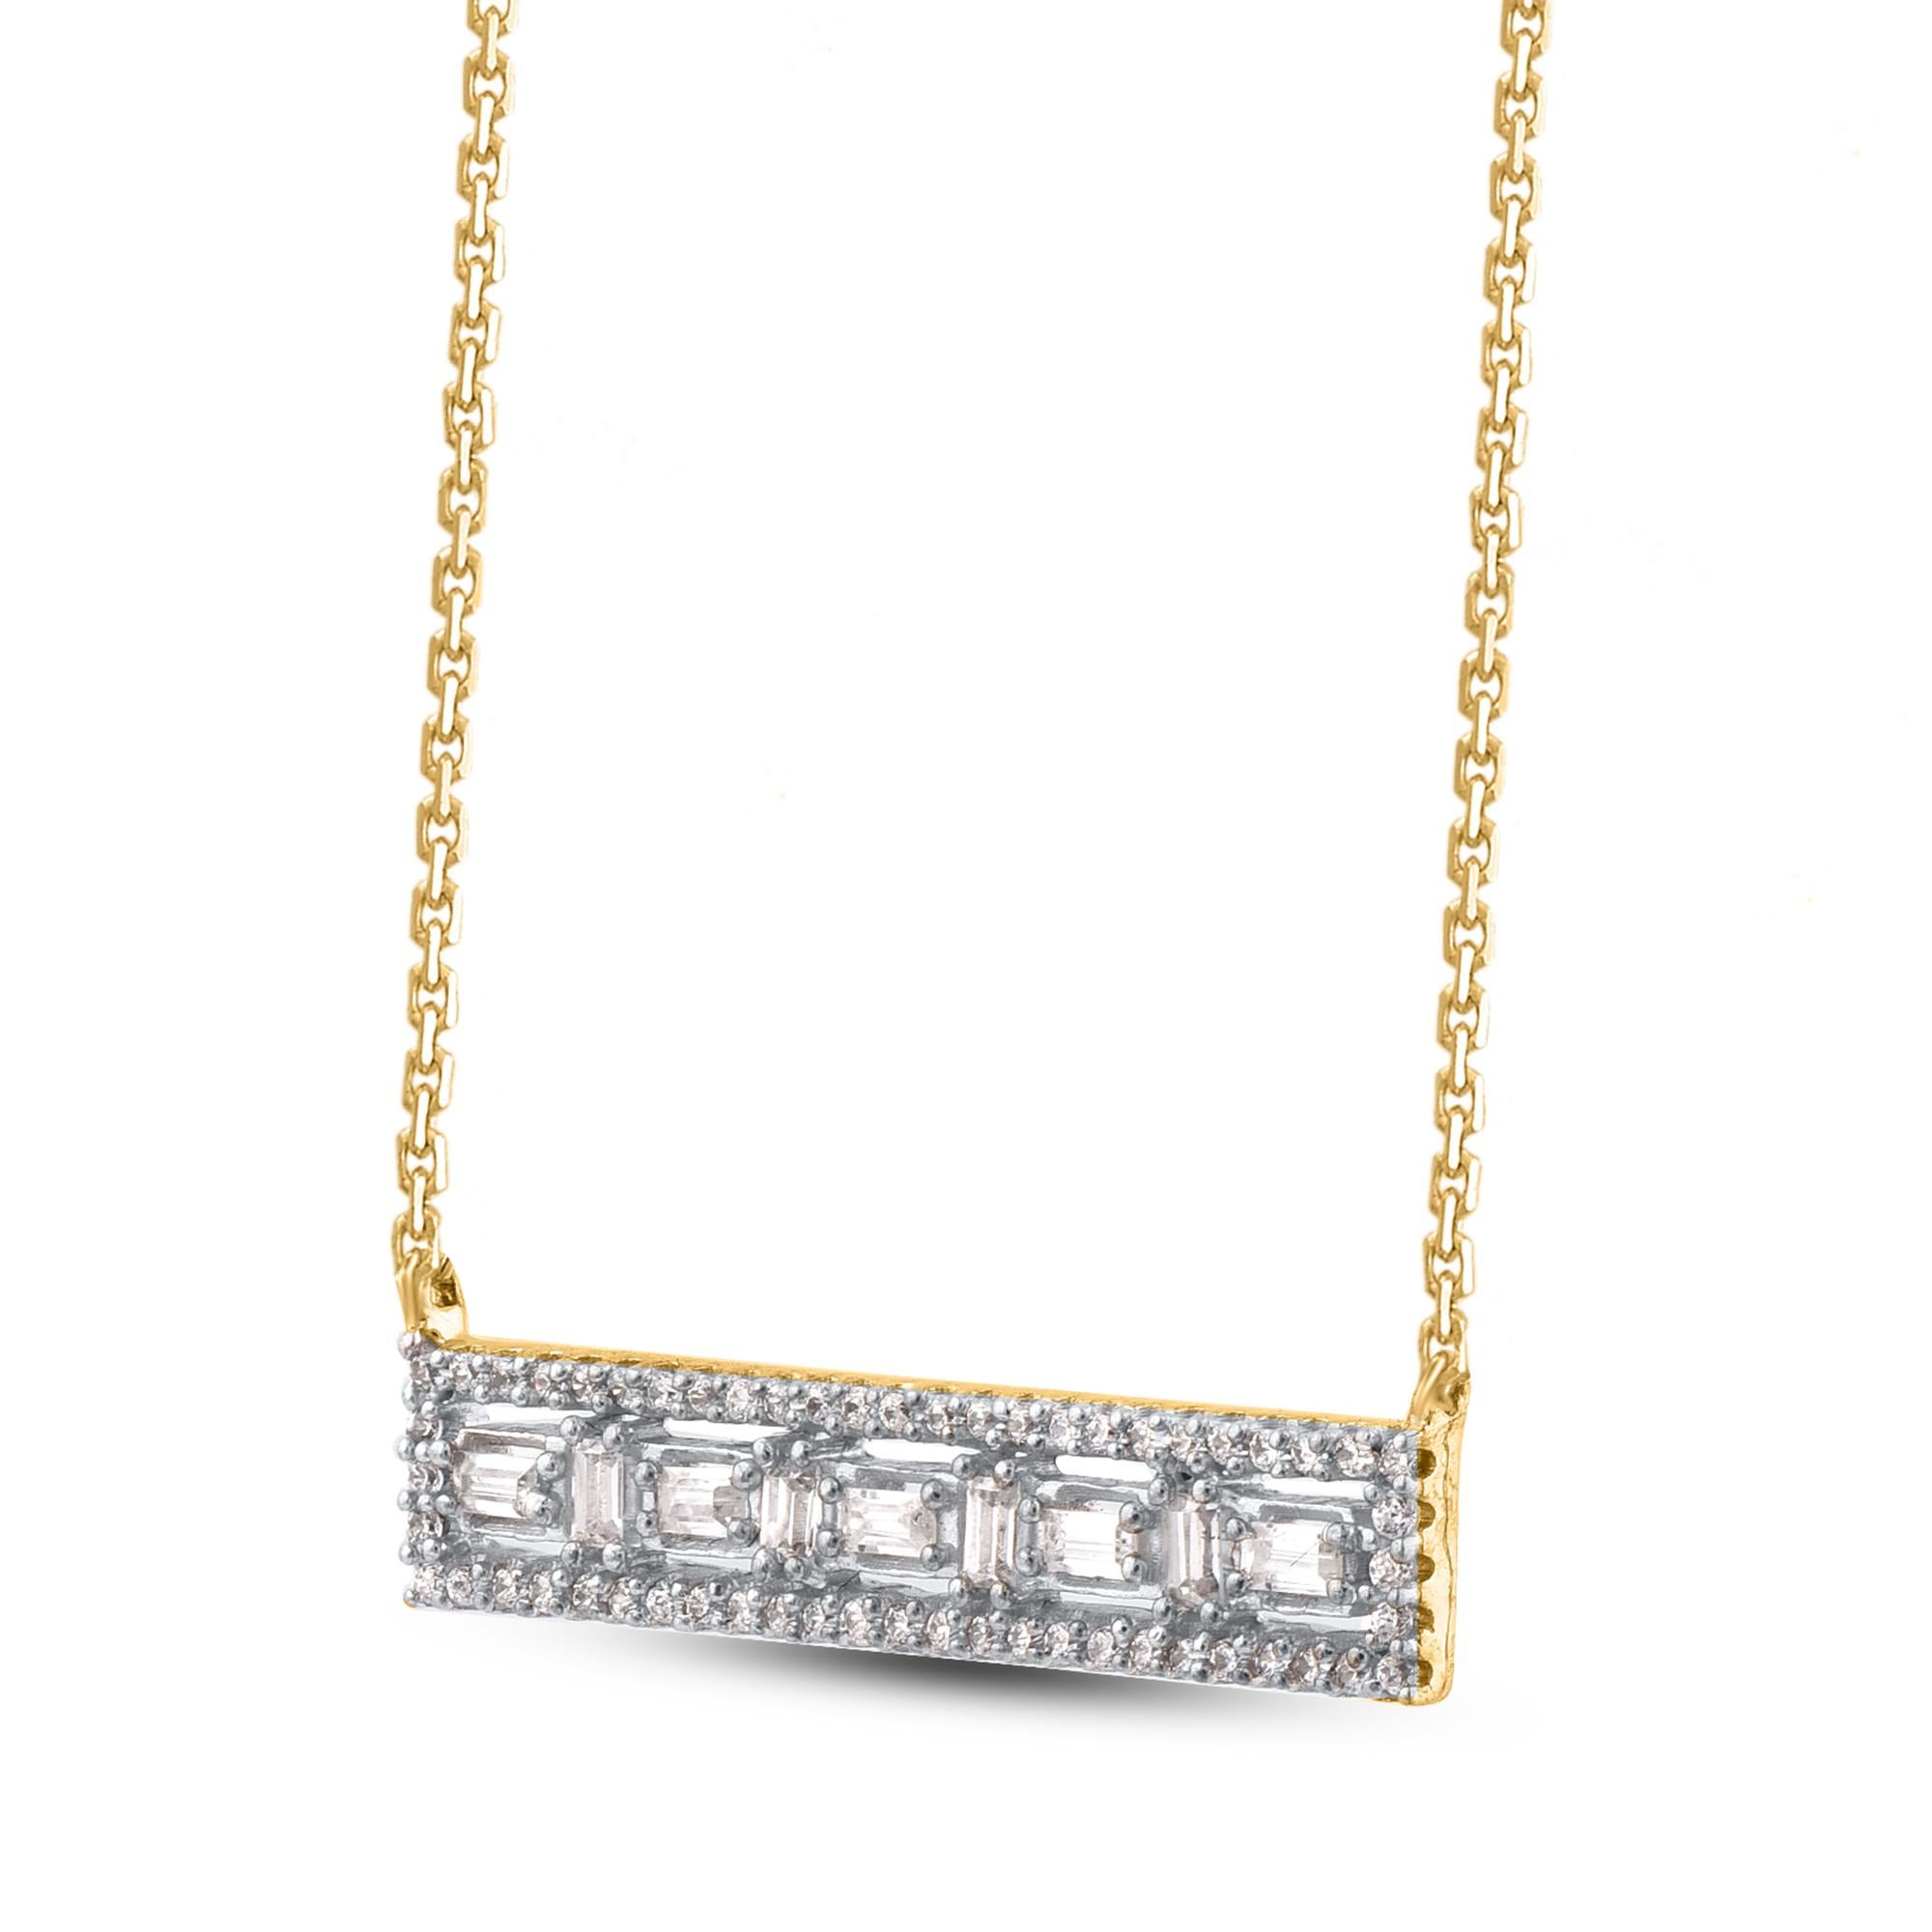 Contemporary TJD 0.25 Carat Natural Round & Baguette Diamond 14KT Yellow Gold Bar Necklace For Sale